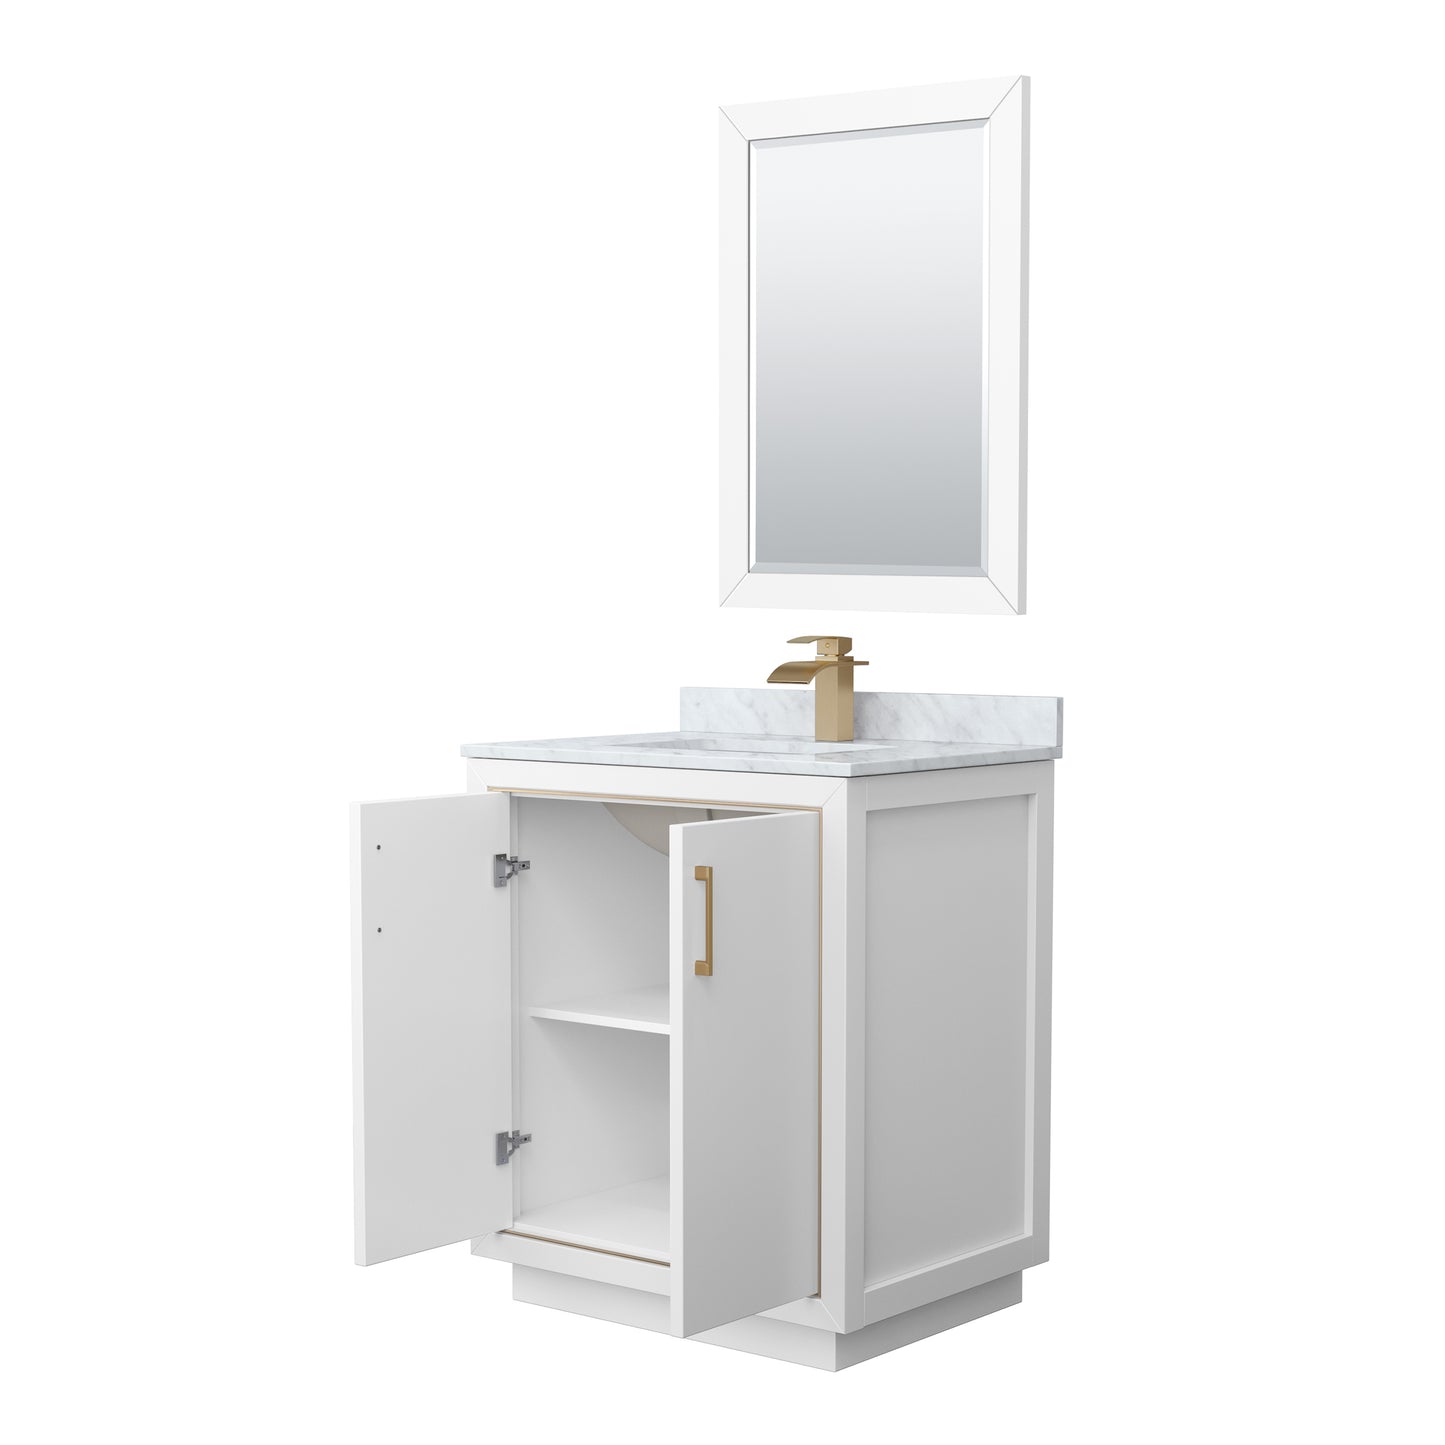 Wyndham Icon 30 Inch Single Bathroom Vanity in White with White Carrara Marble Countertop, Undermount Square Sink, Satin Bronze Trim and 24 Inch Mirror - Luxe Bathroom Vanities